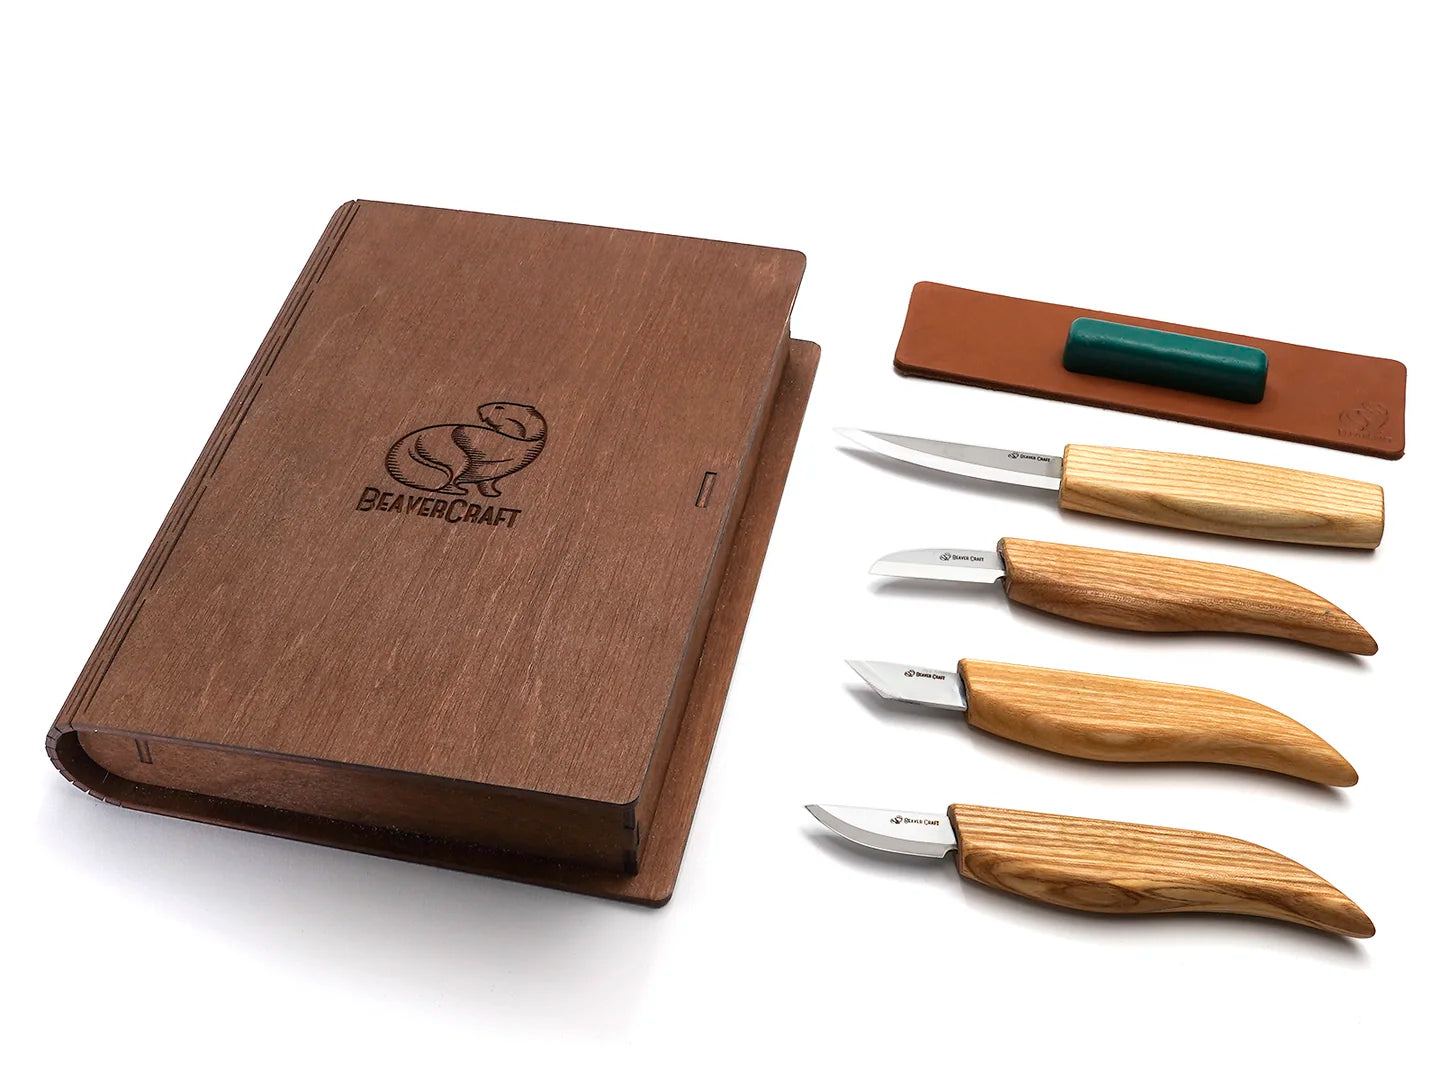 Woodcarving Tools Set TOP Carving Knives in a Book Case S07 BeaverCraft